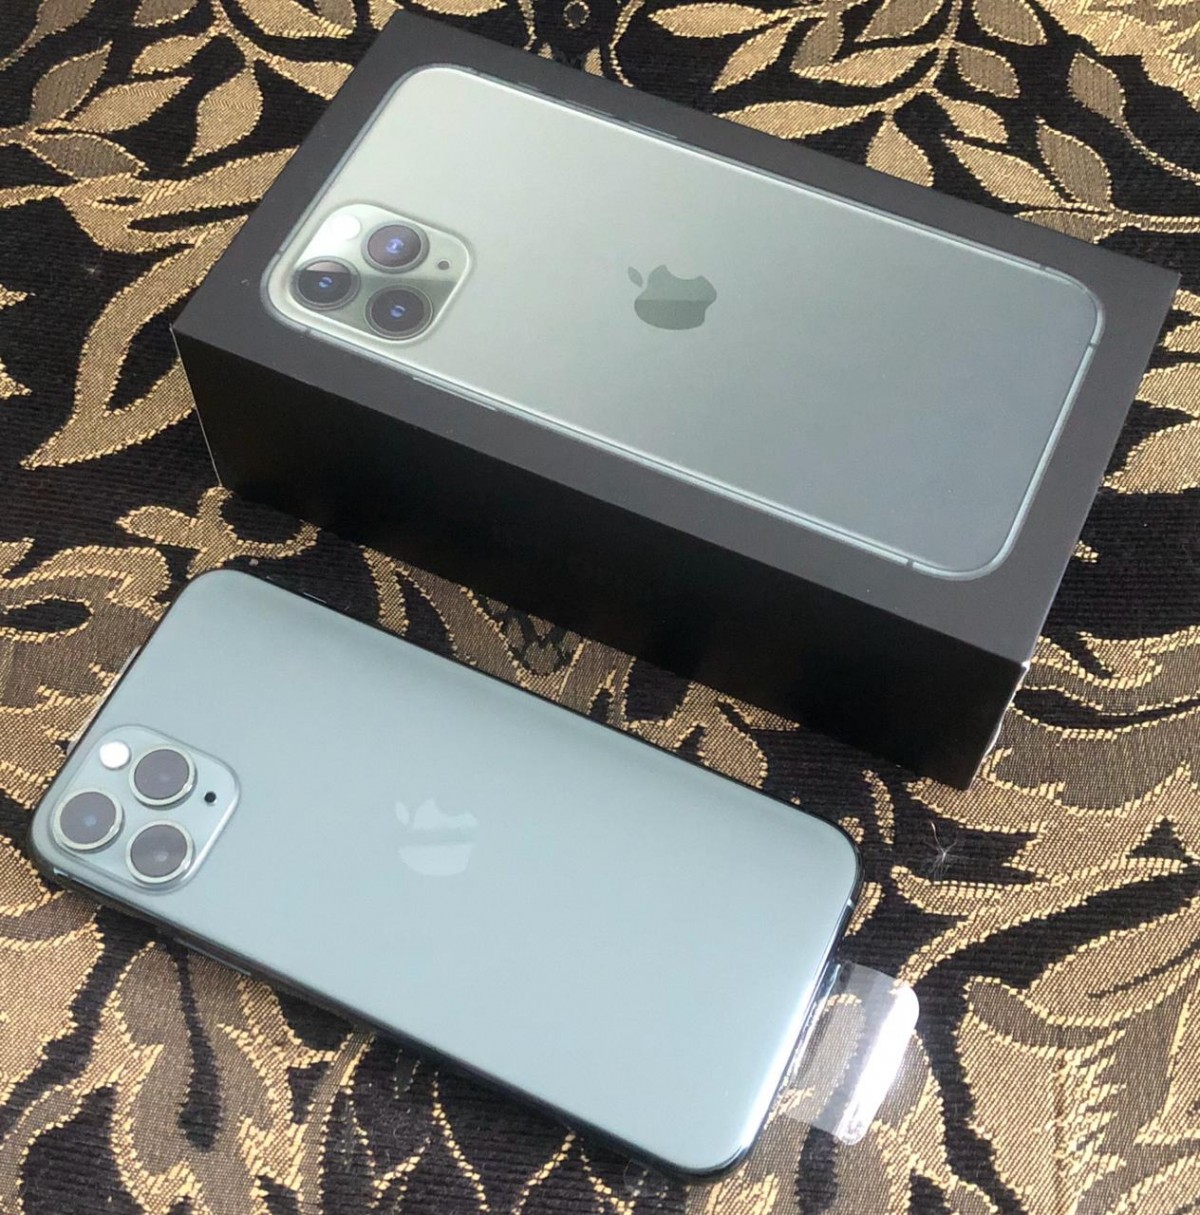 BRAND NEW IN BOX IPhone11pro (256GB,Unlocked) Pric for sale in Kingston